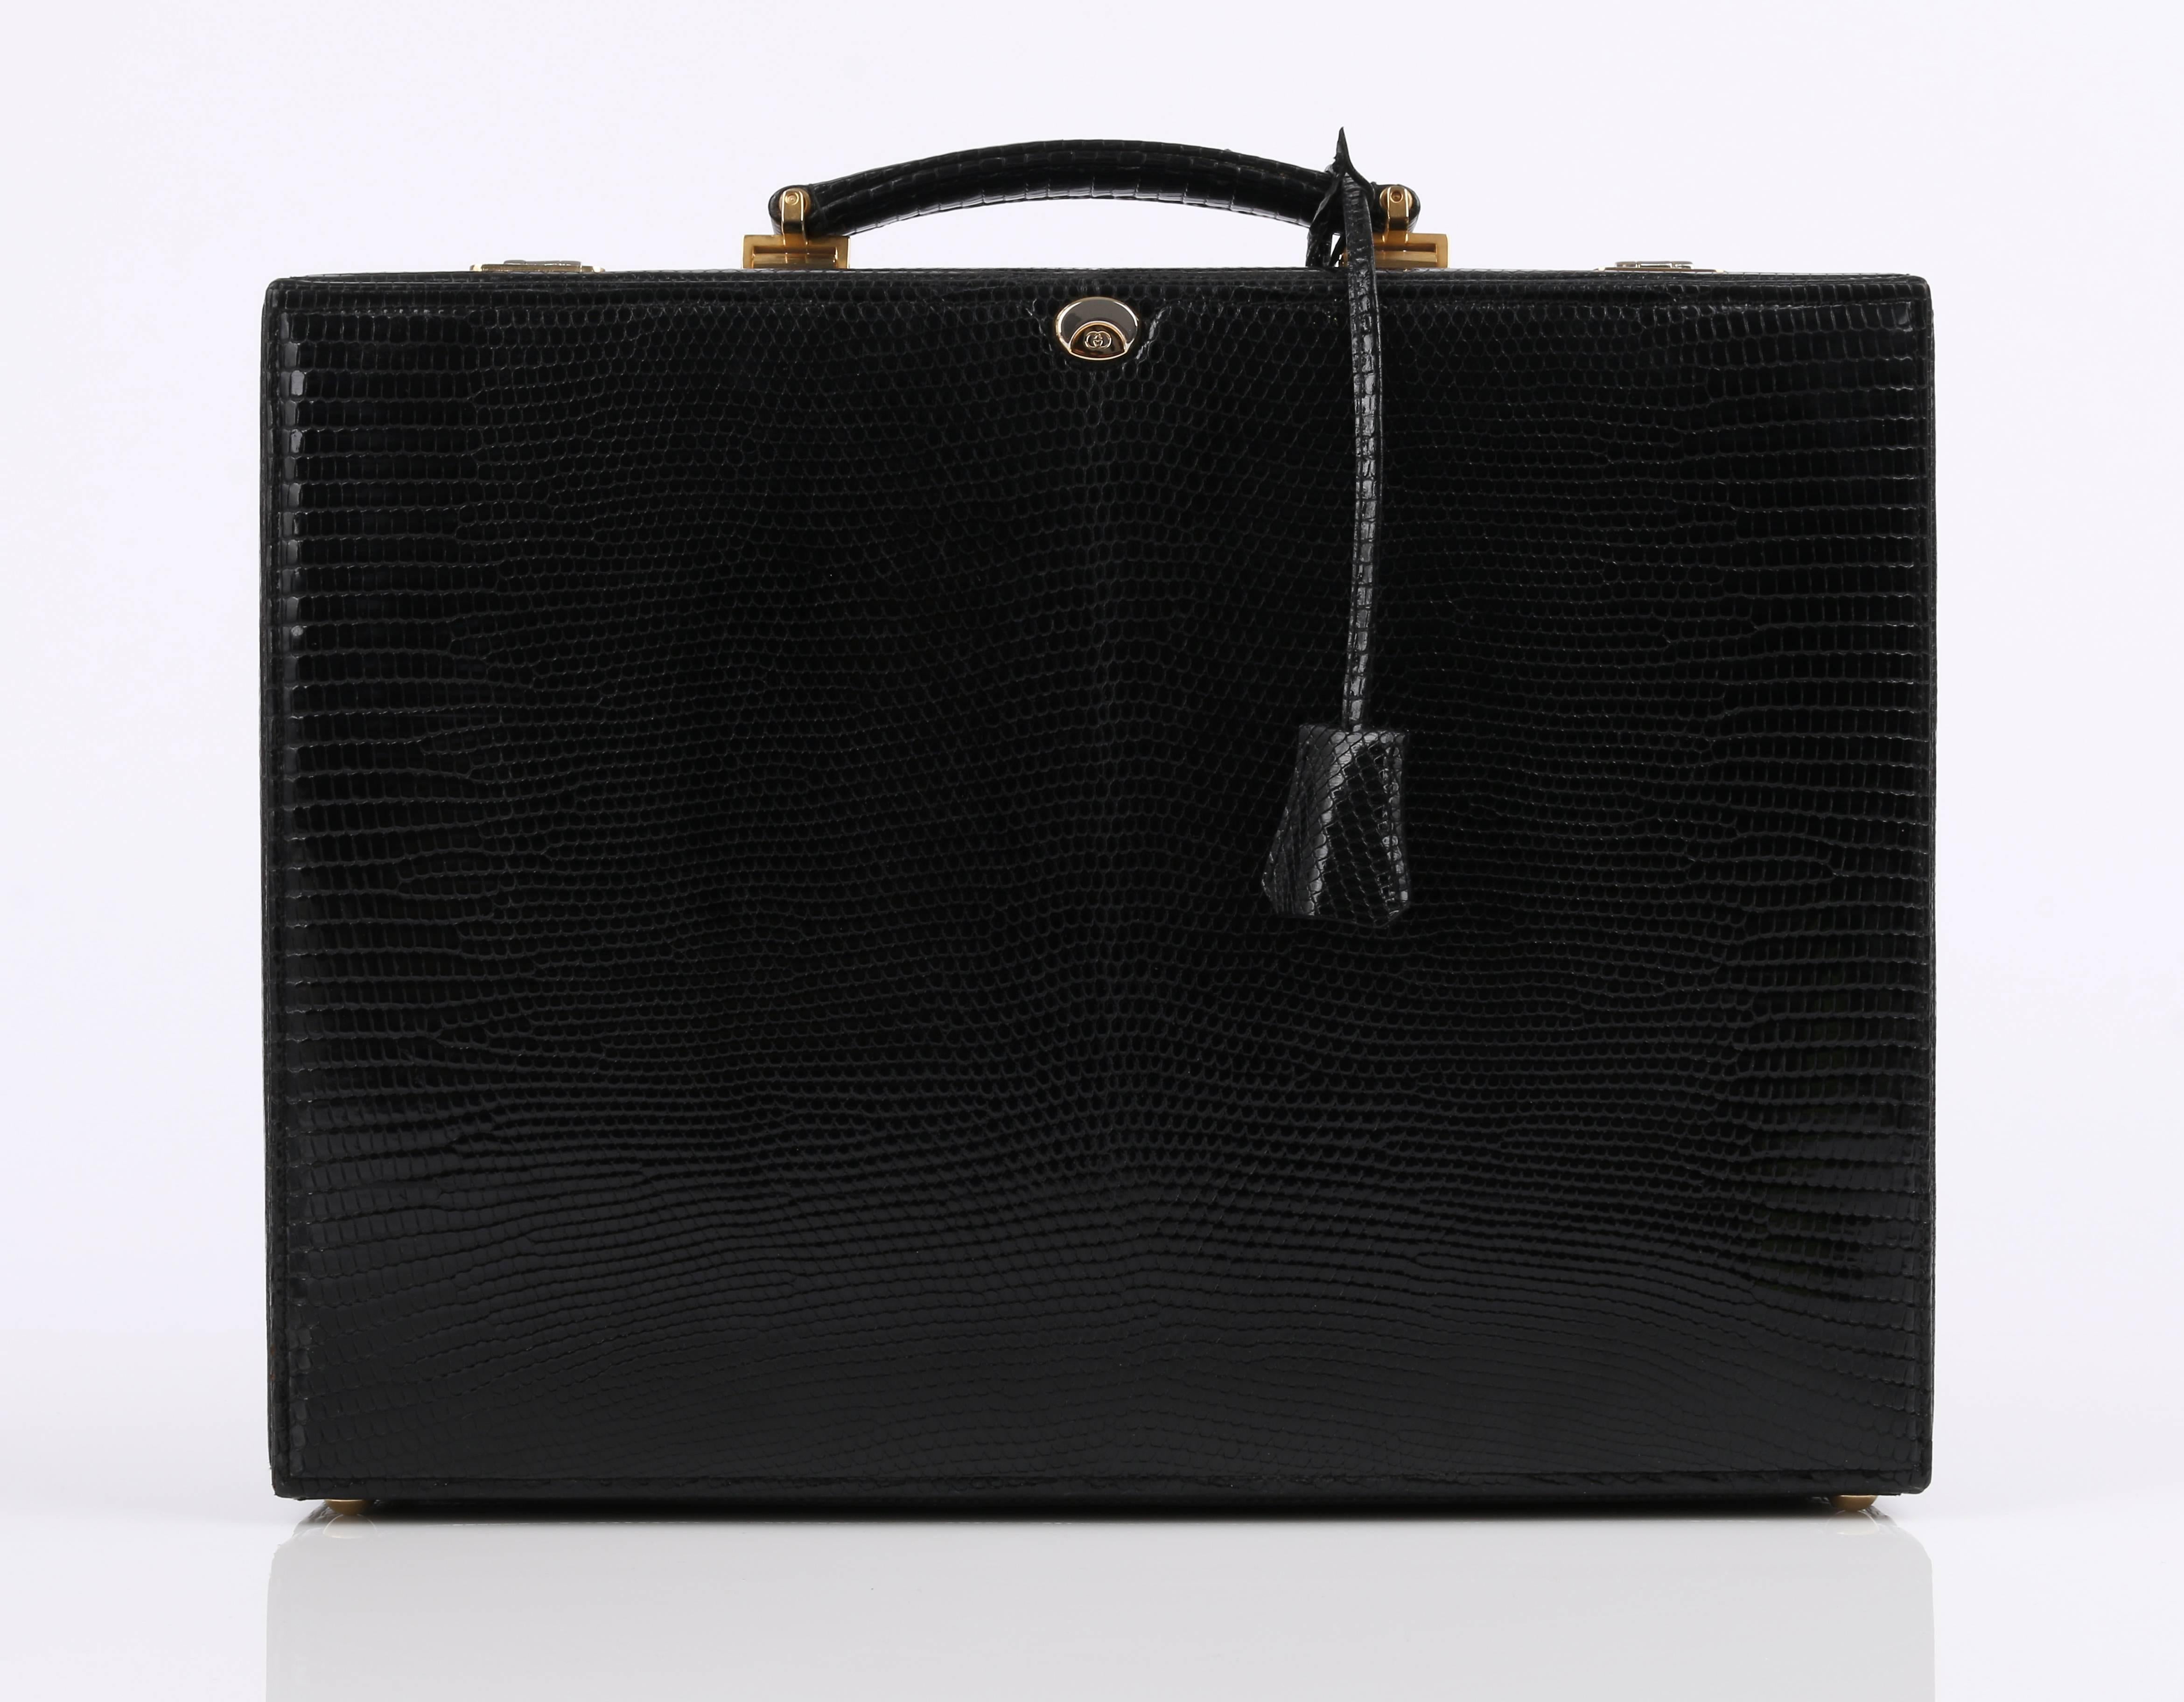 Gucci black lizard leather jewelry briefcase. Black lizard leather handle. Gold tone signature hardware with double locks. Red velvet lined interior. Five removable leather and red velvet trays of varying sizes. Removable red velvet pad at bottom.